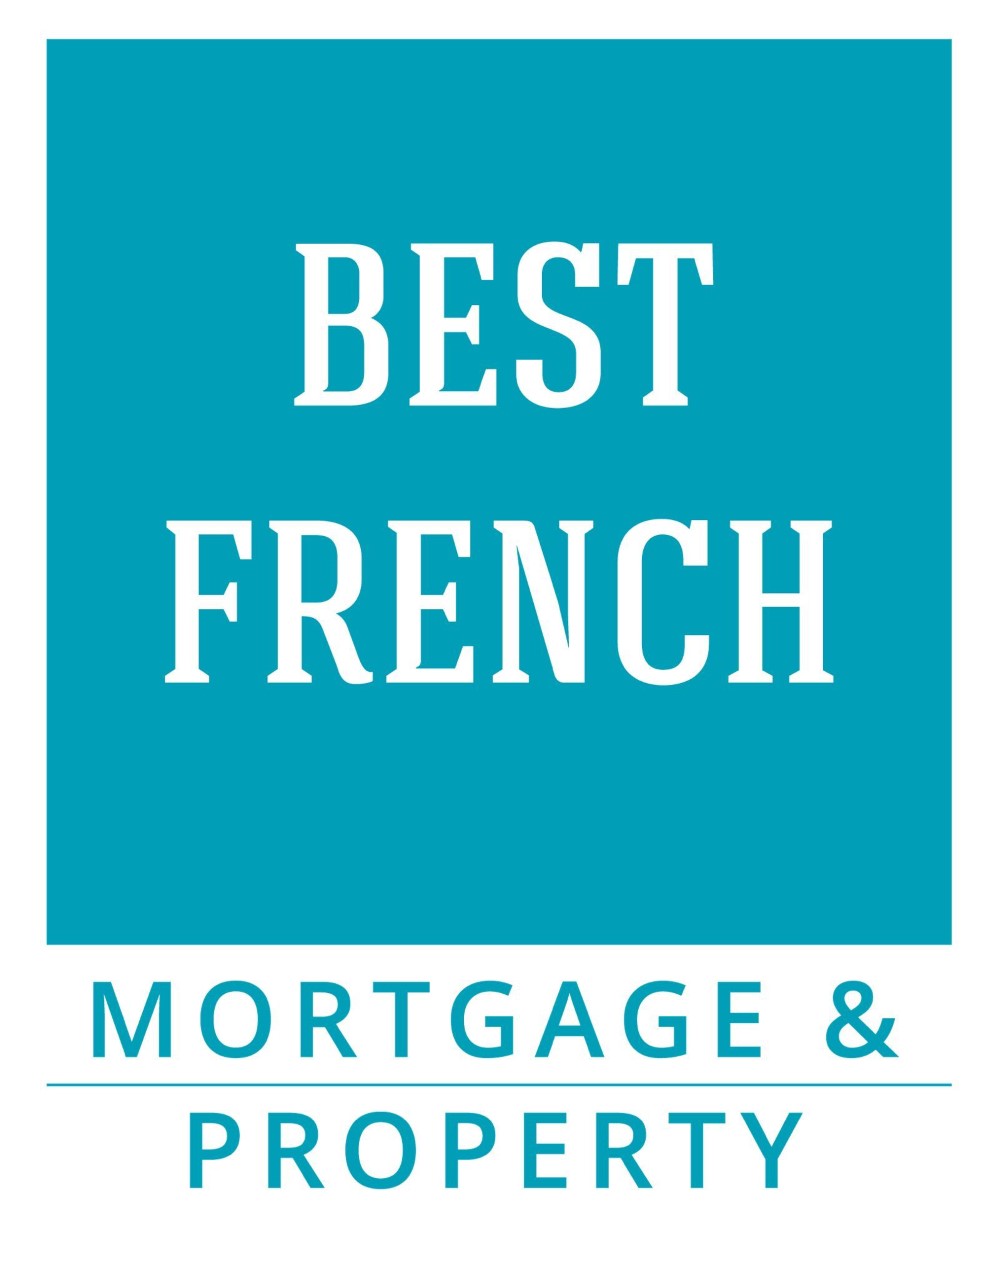 Best French Mortgage